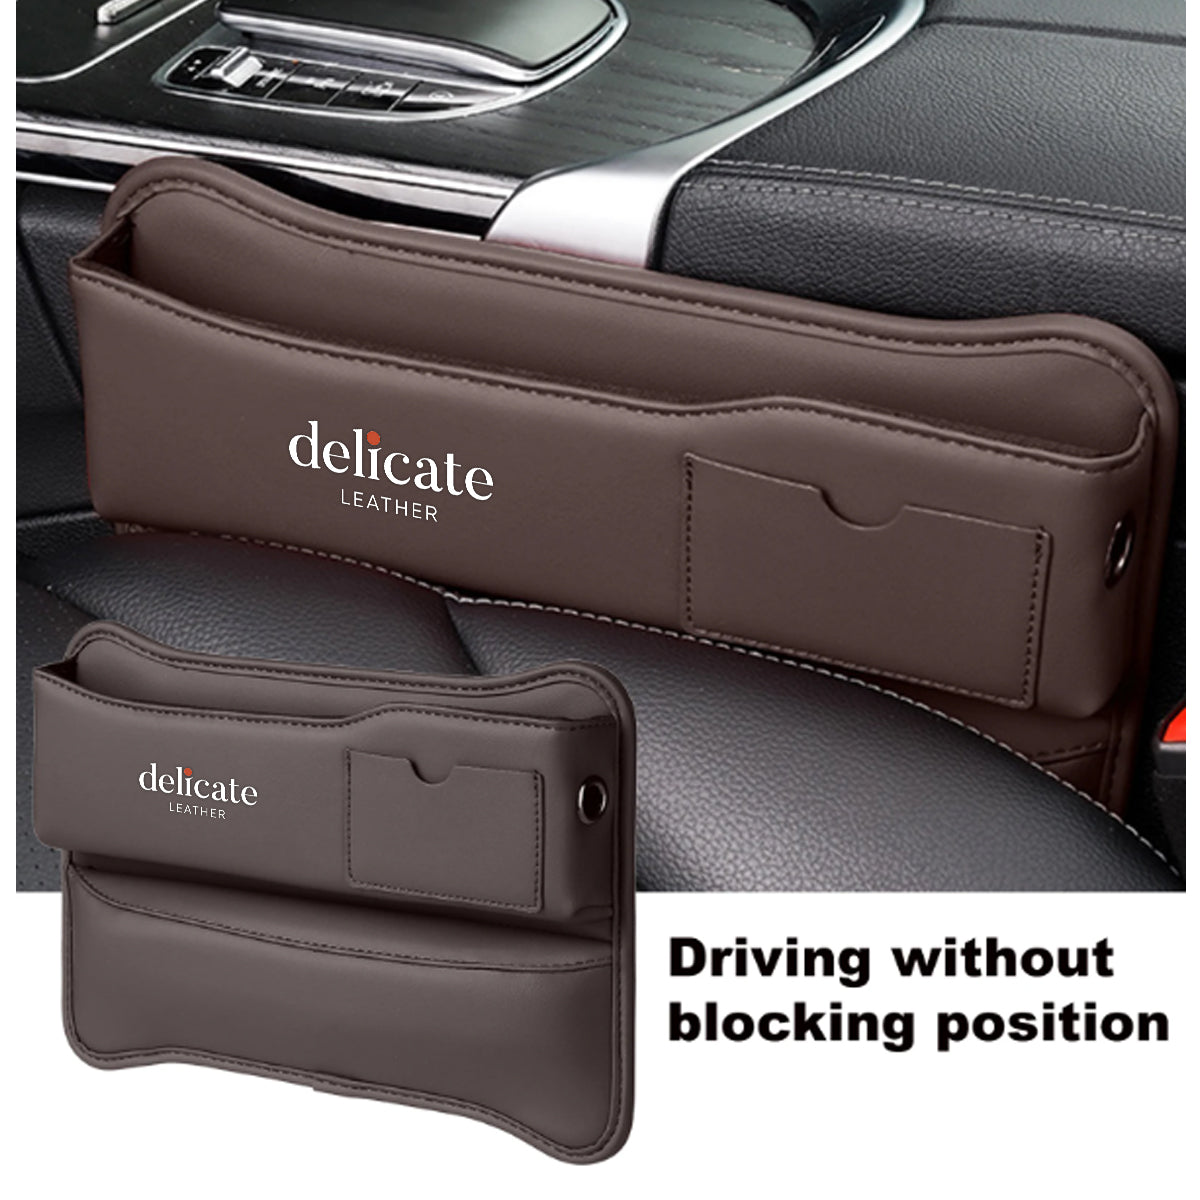 Car Seat Gap Filler Organizer, Custom For Your Cars, Multifunctional PU Leather Console Side Pocket Organizer for Cellphones, Cards, Wallets, Keys - Delicate Leather